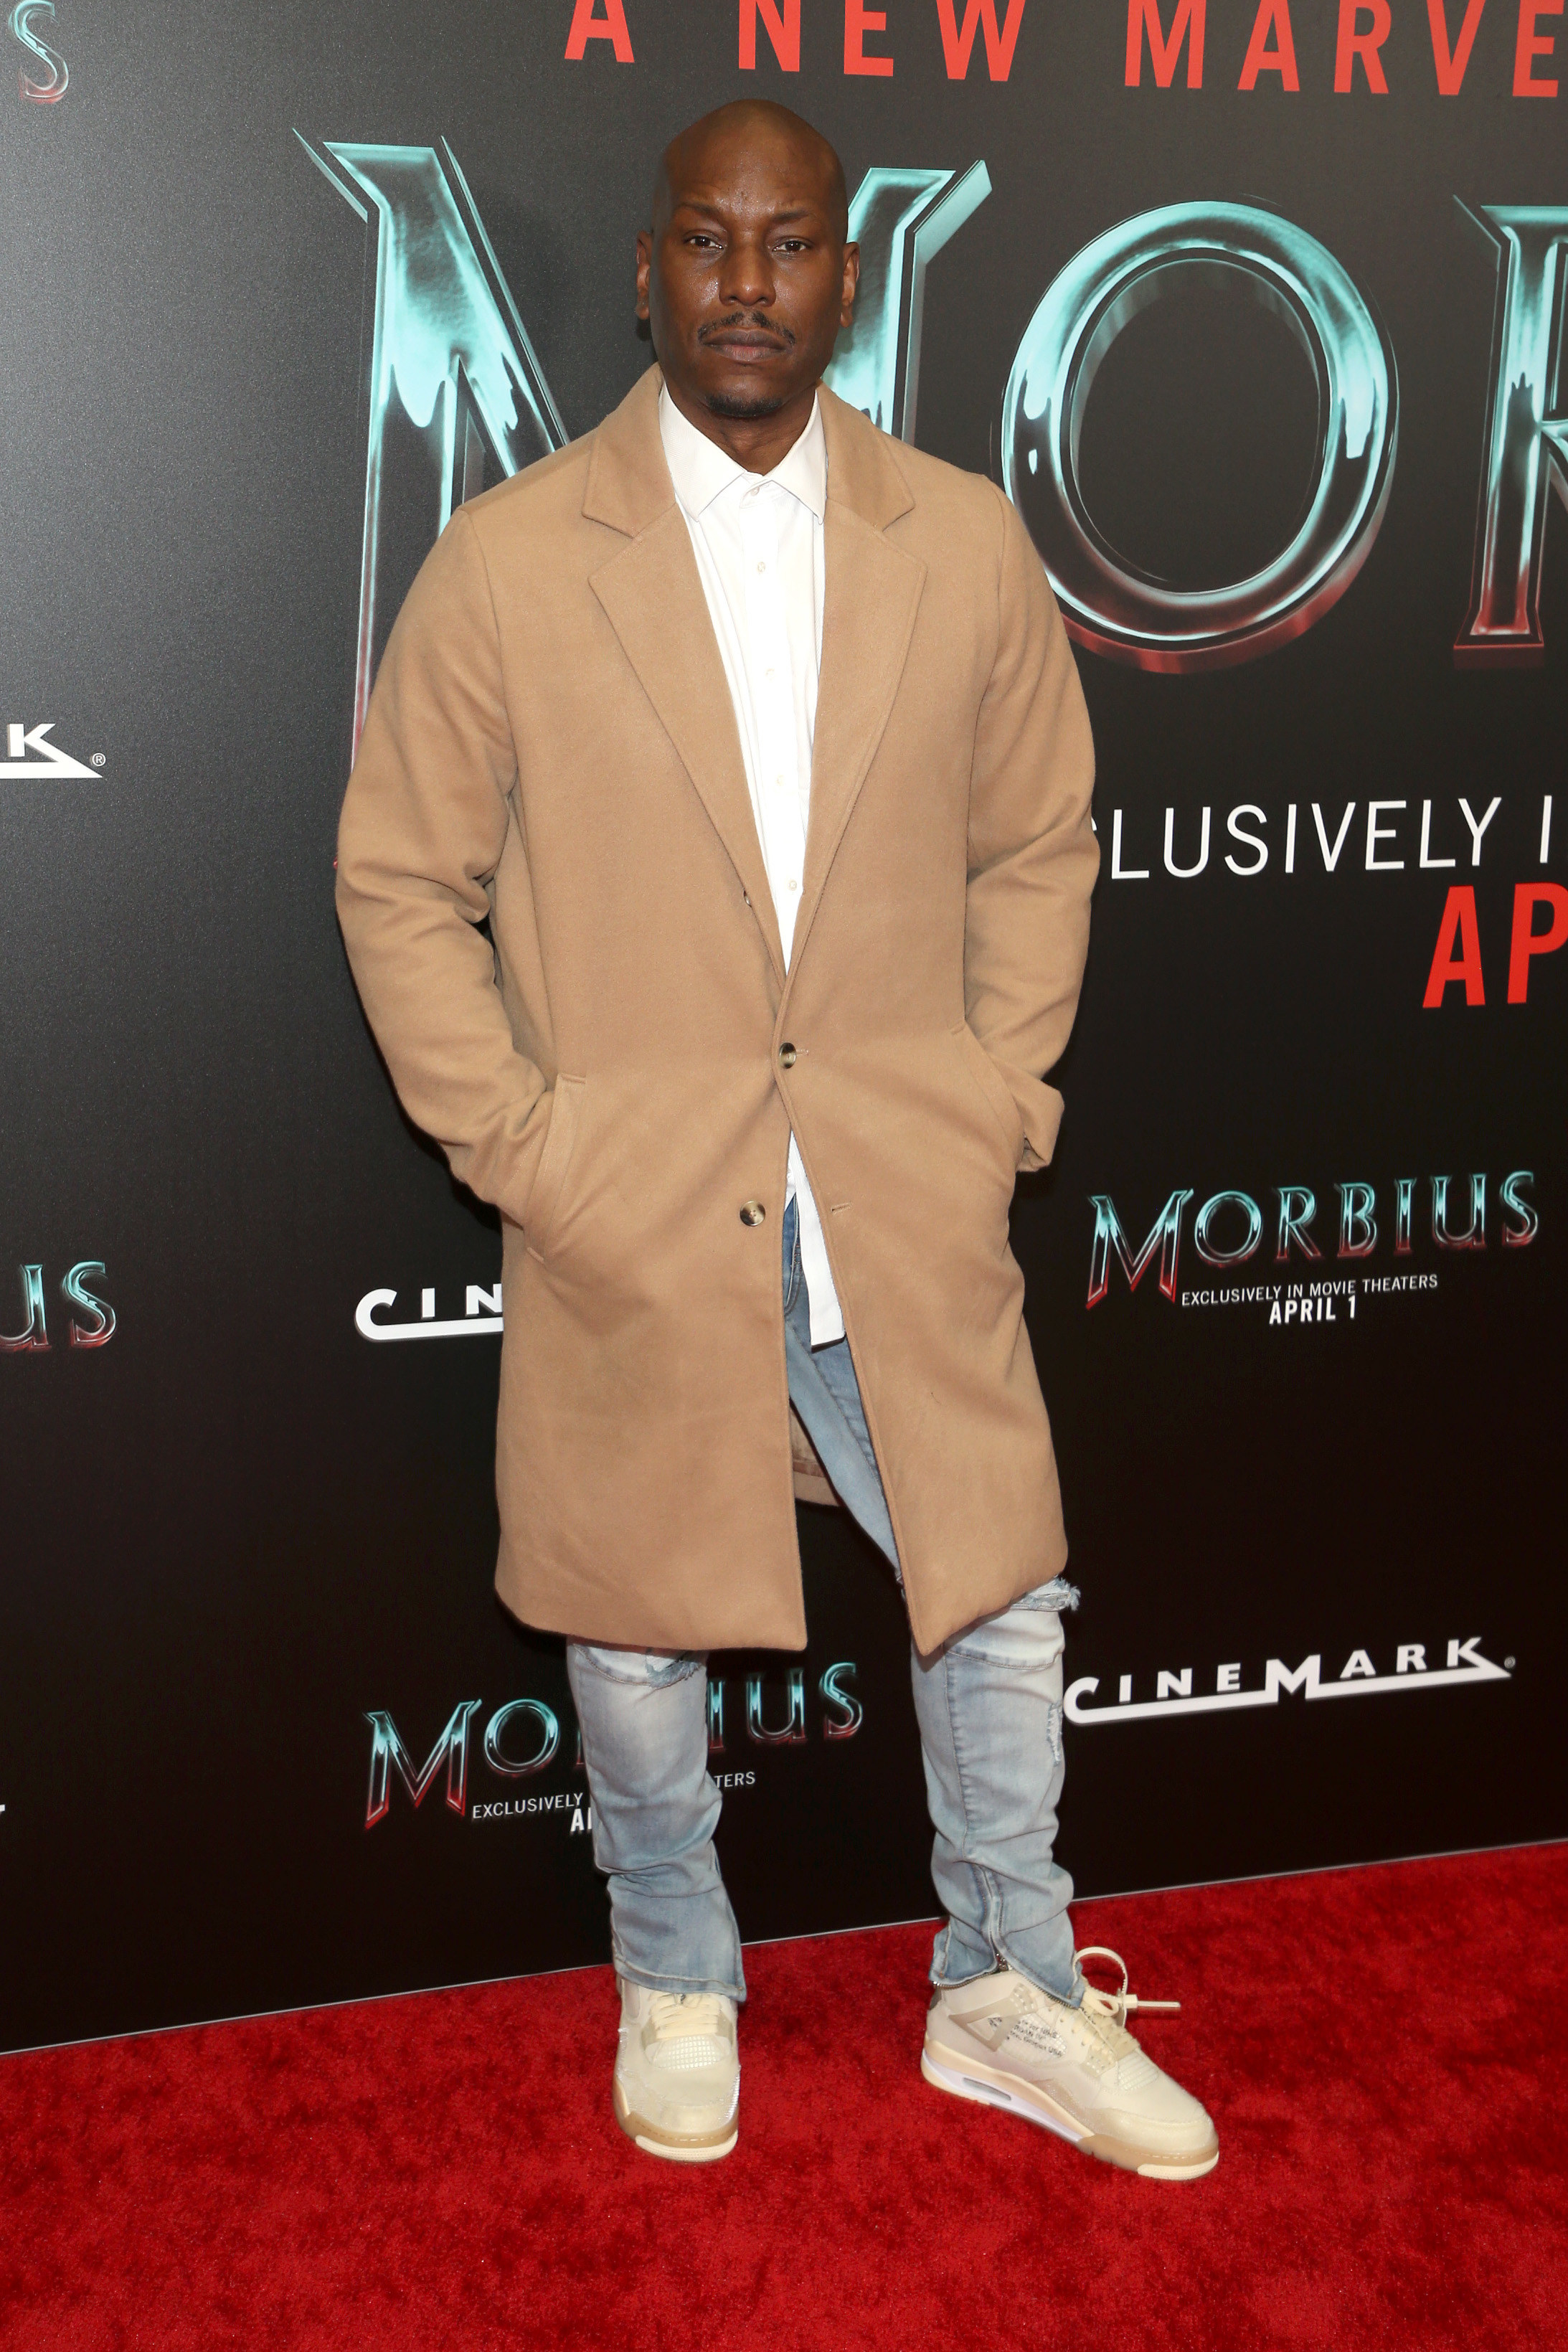 Wearing jeans and sneakers and an overcoat on the red carpet and not smiling